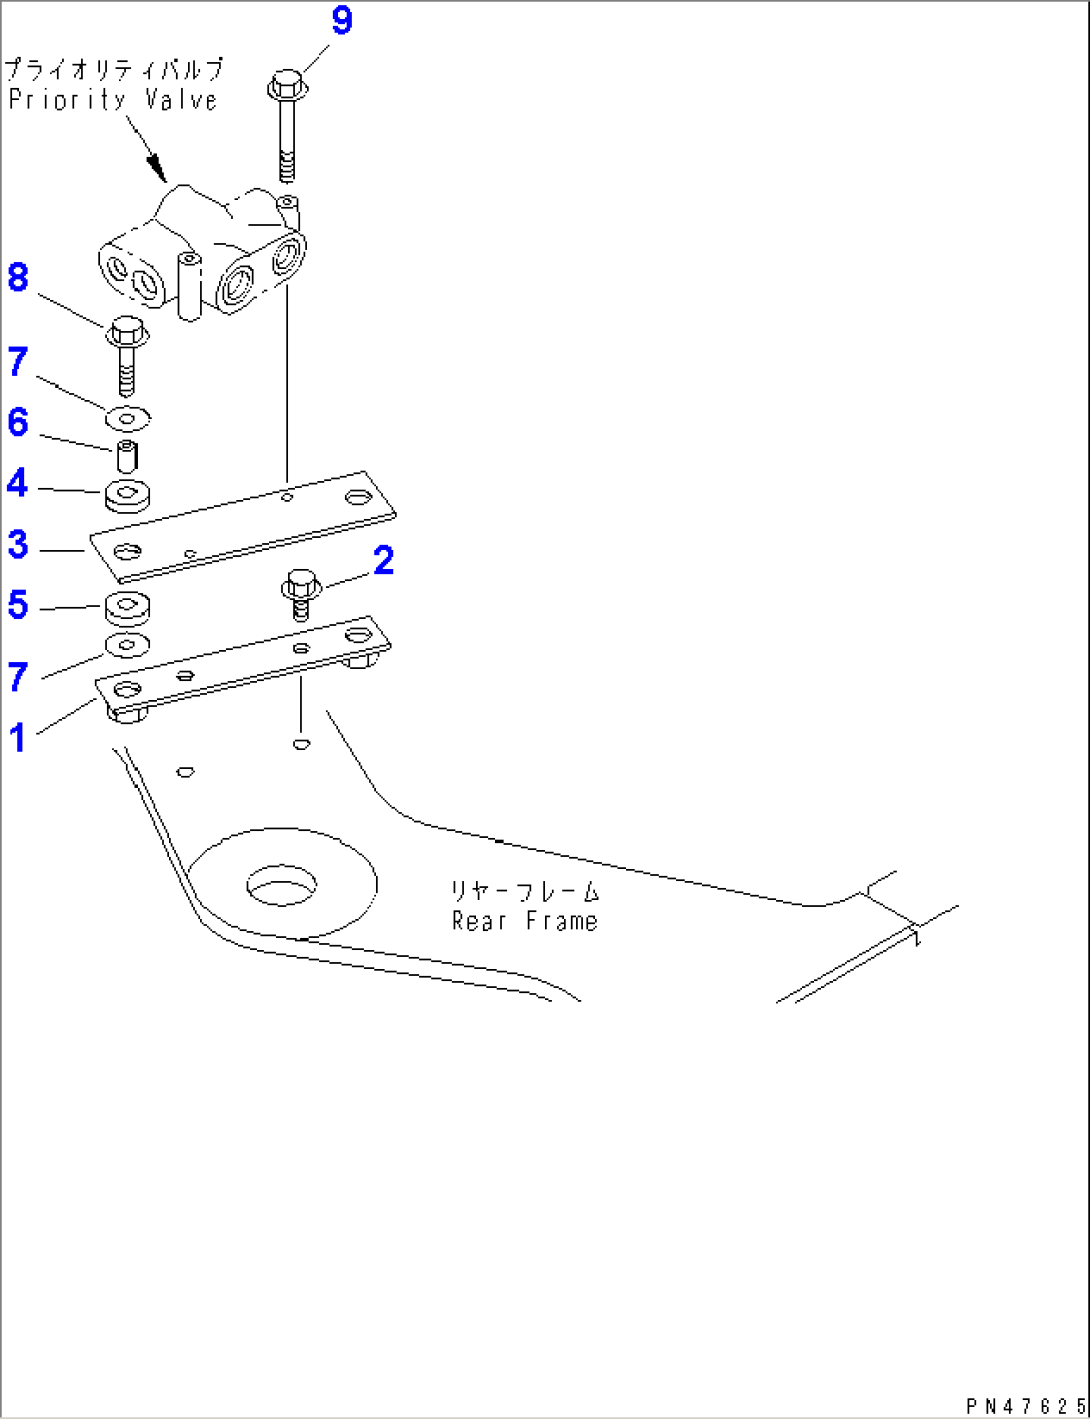 PRIORITY VALVE MOUNTING PARTS(#60001-)